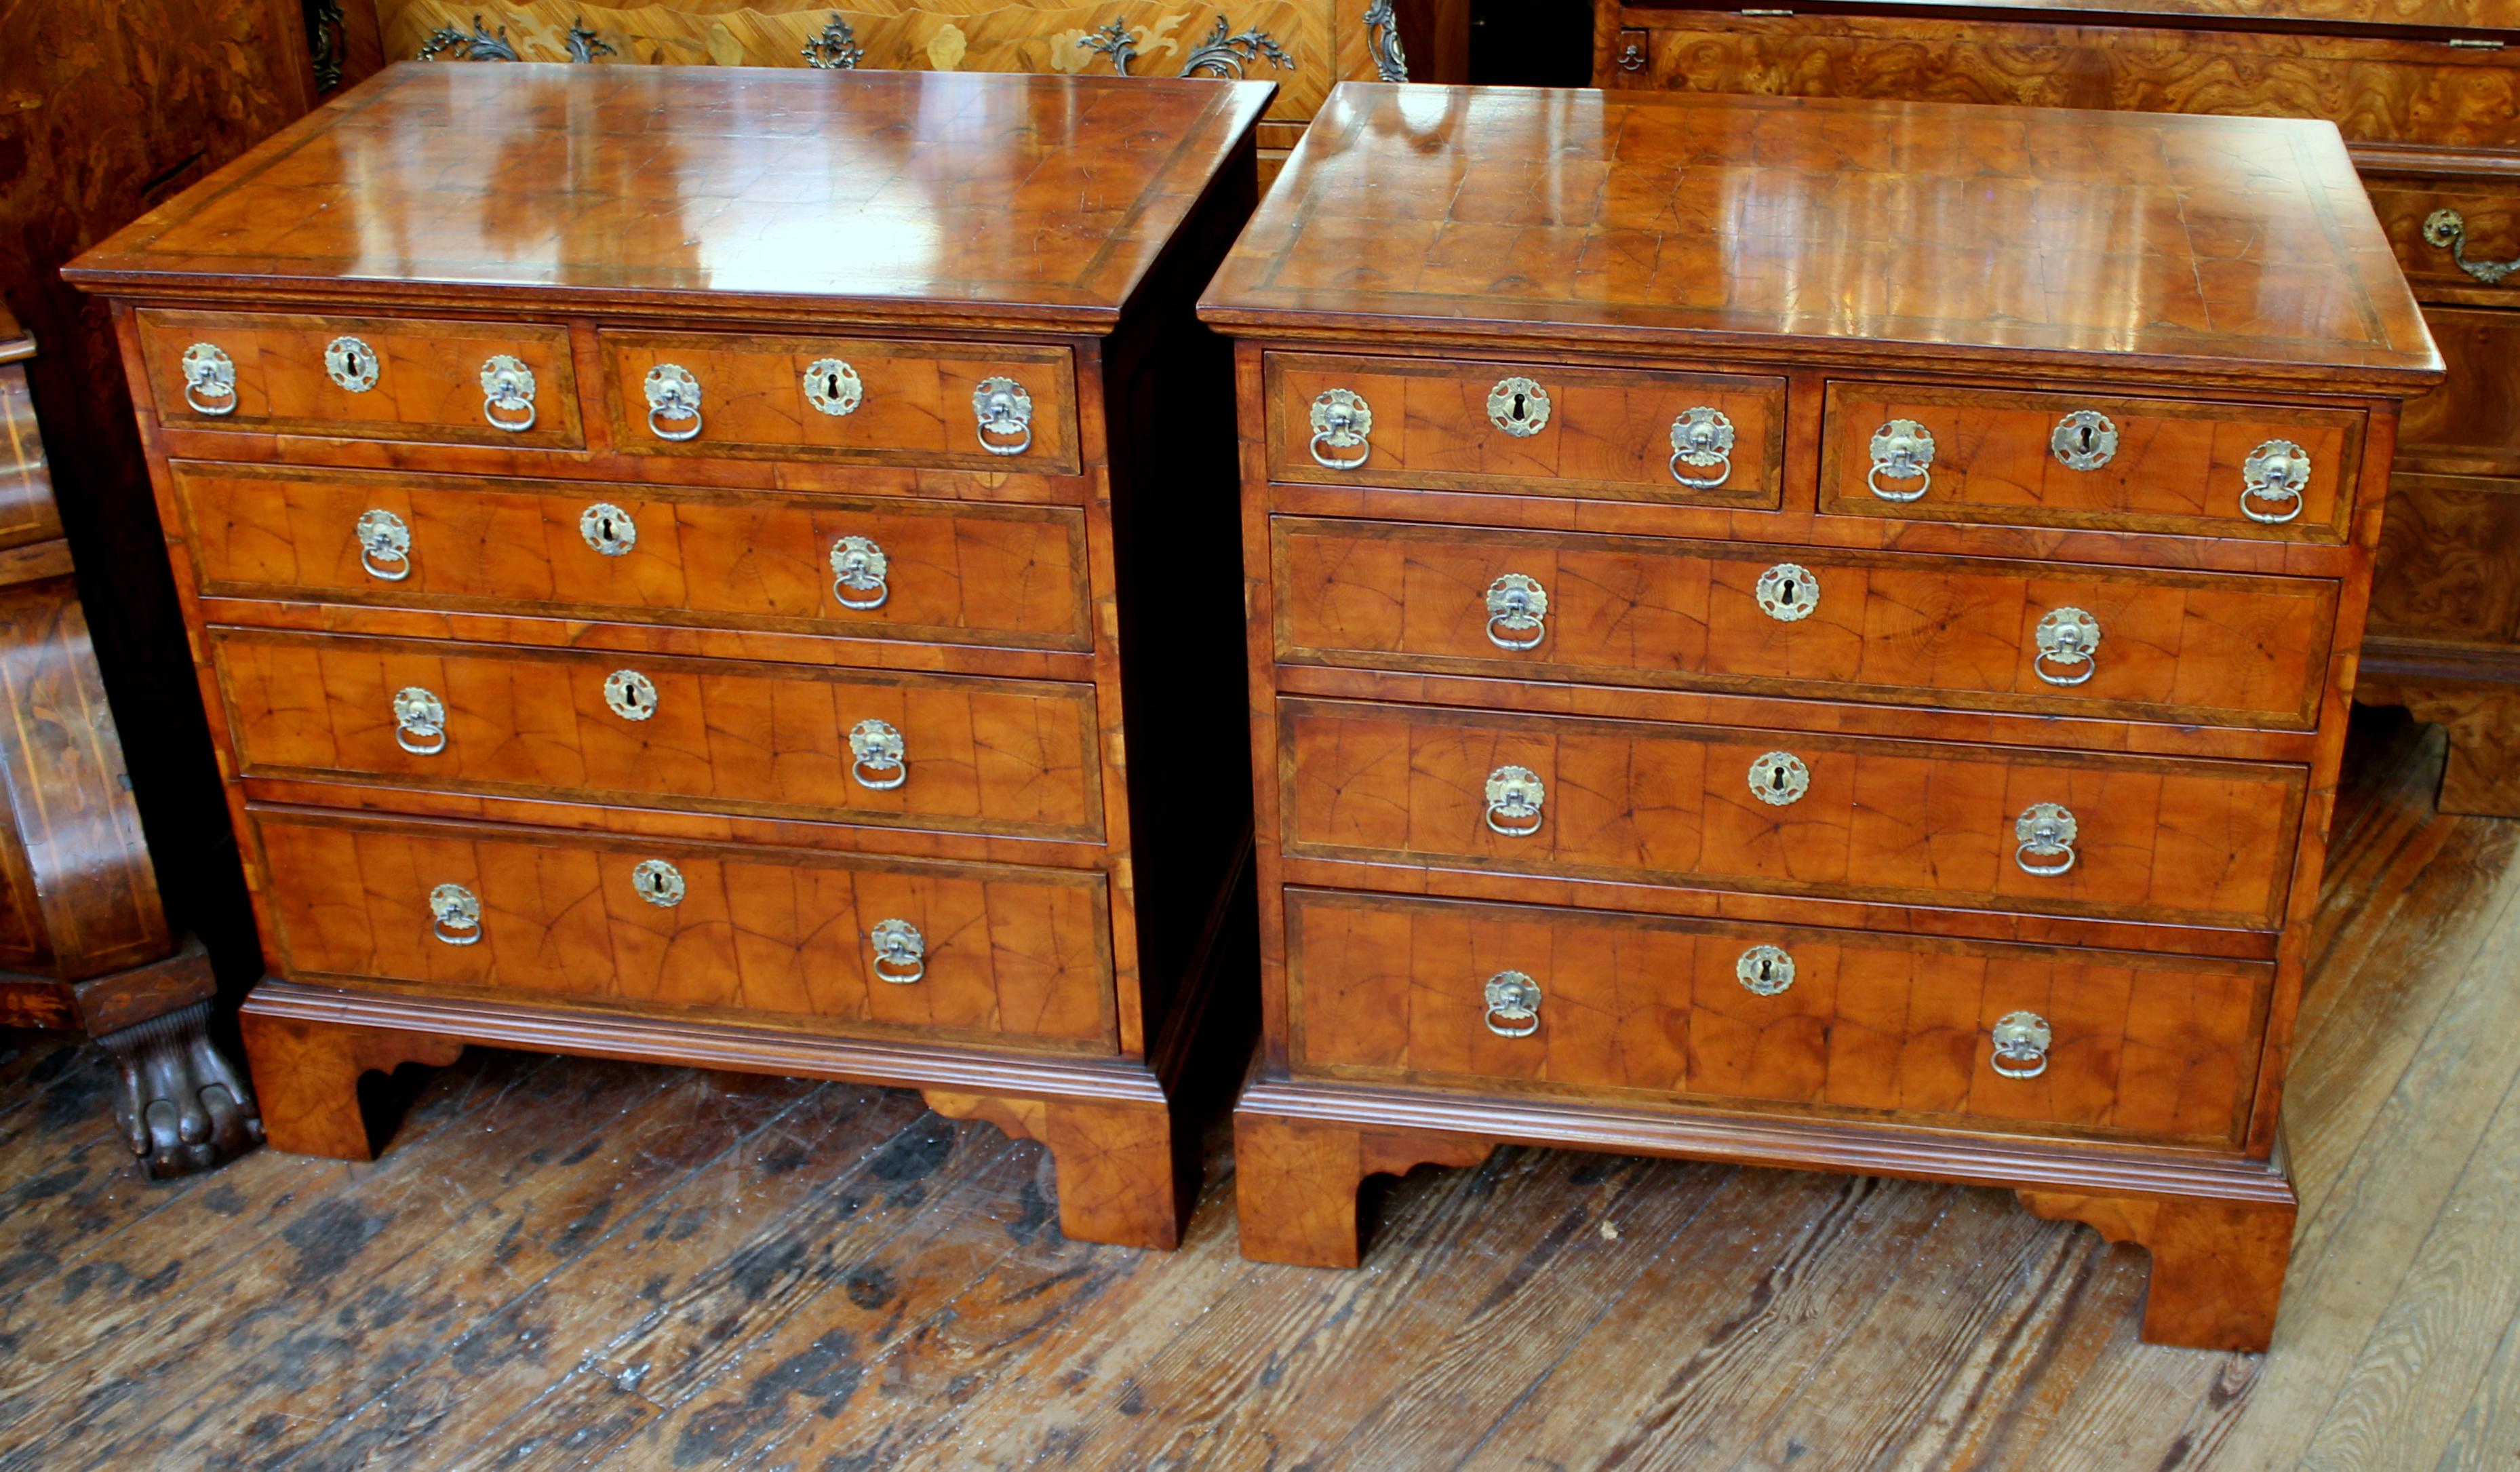 Very rare pair of fabulous quality antique English oyster veneer inlaid yew wood Queen Anne revival bachelor's chests
Please note 